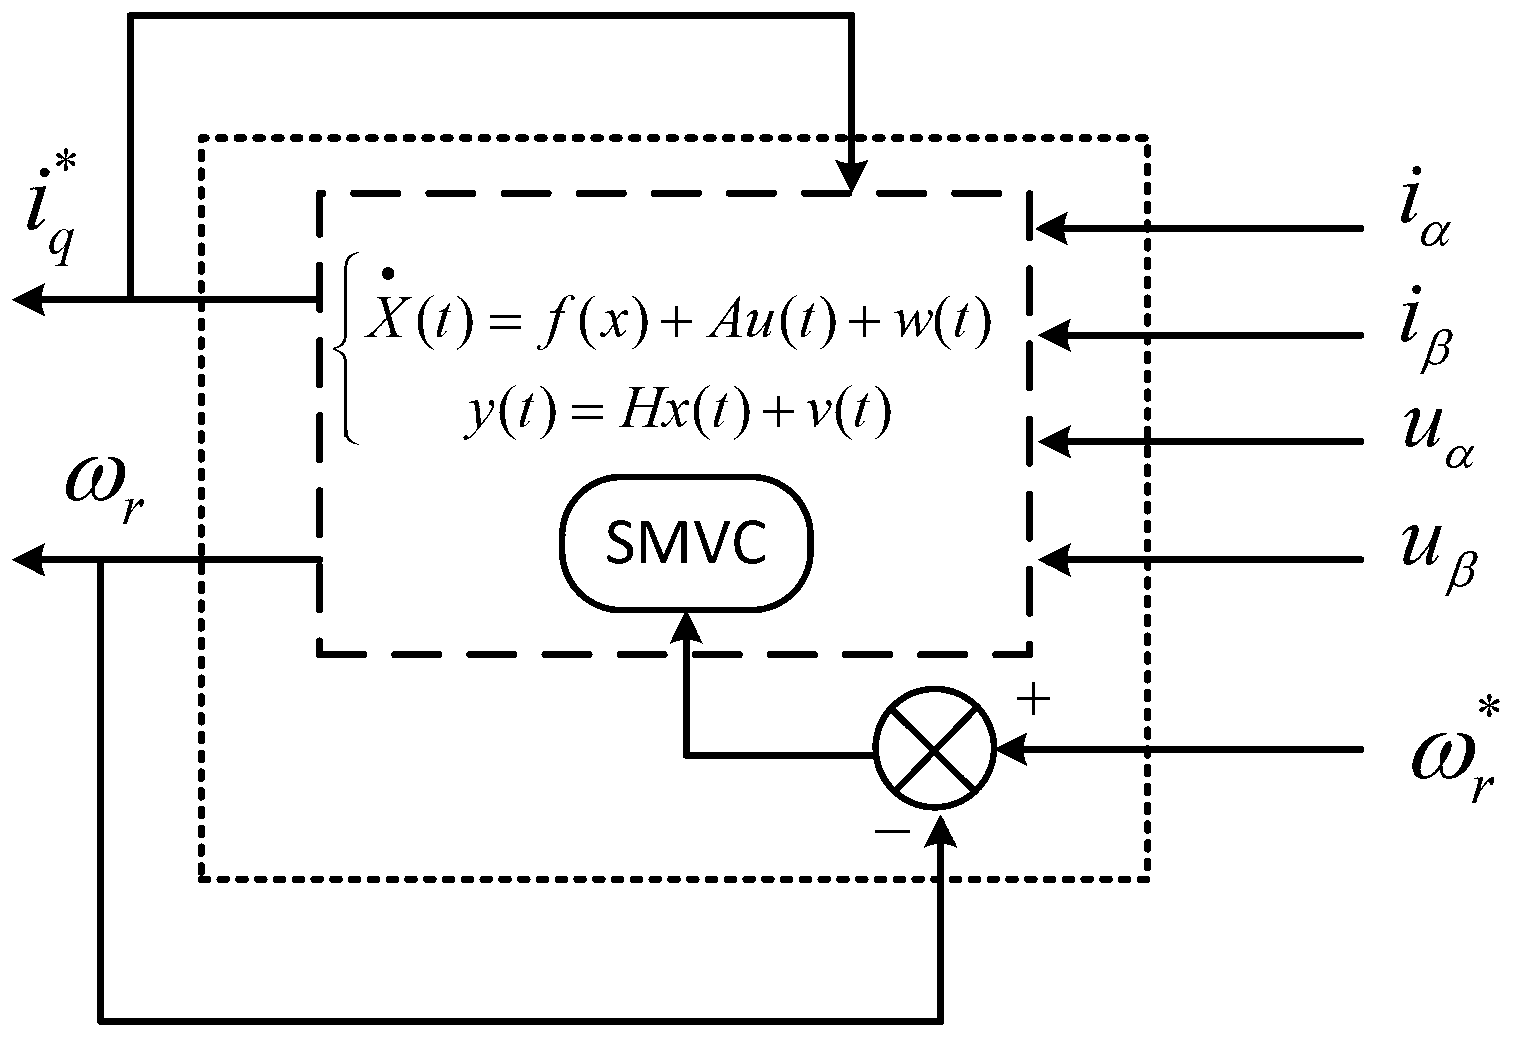 System and method for controlling speedless sensor of permanent-magnet synchronous motor